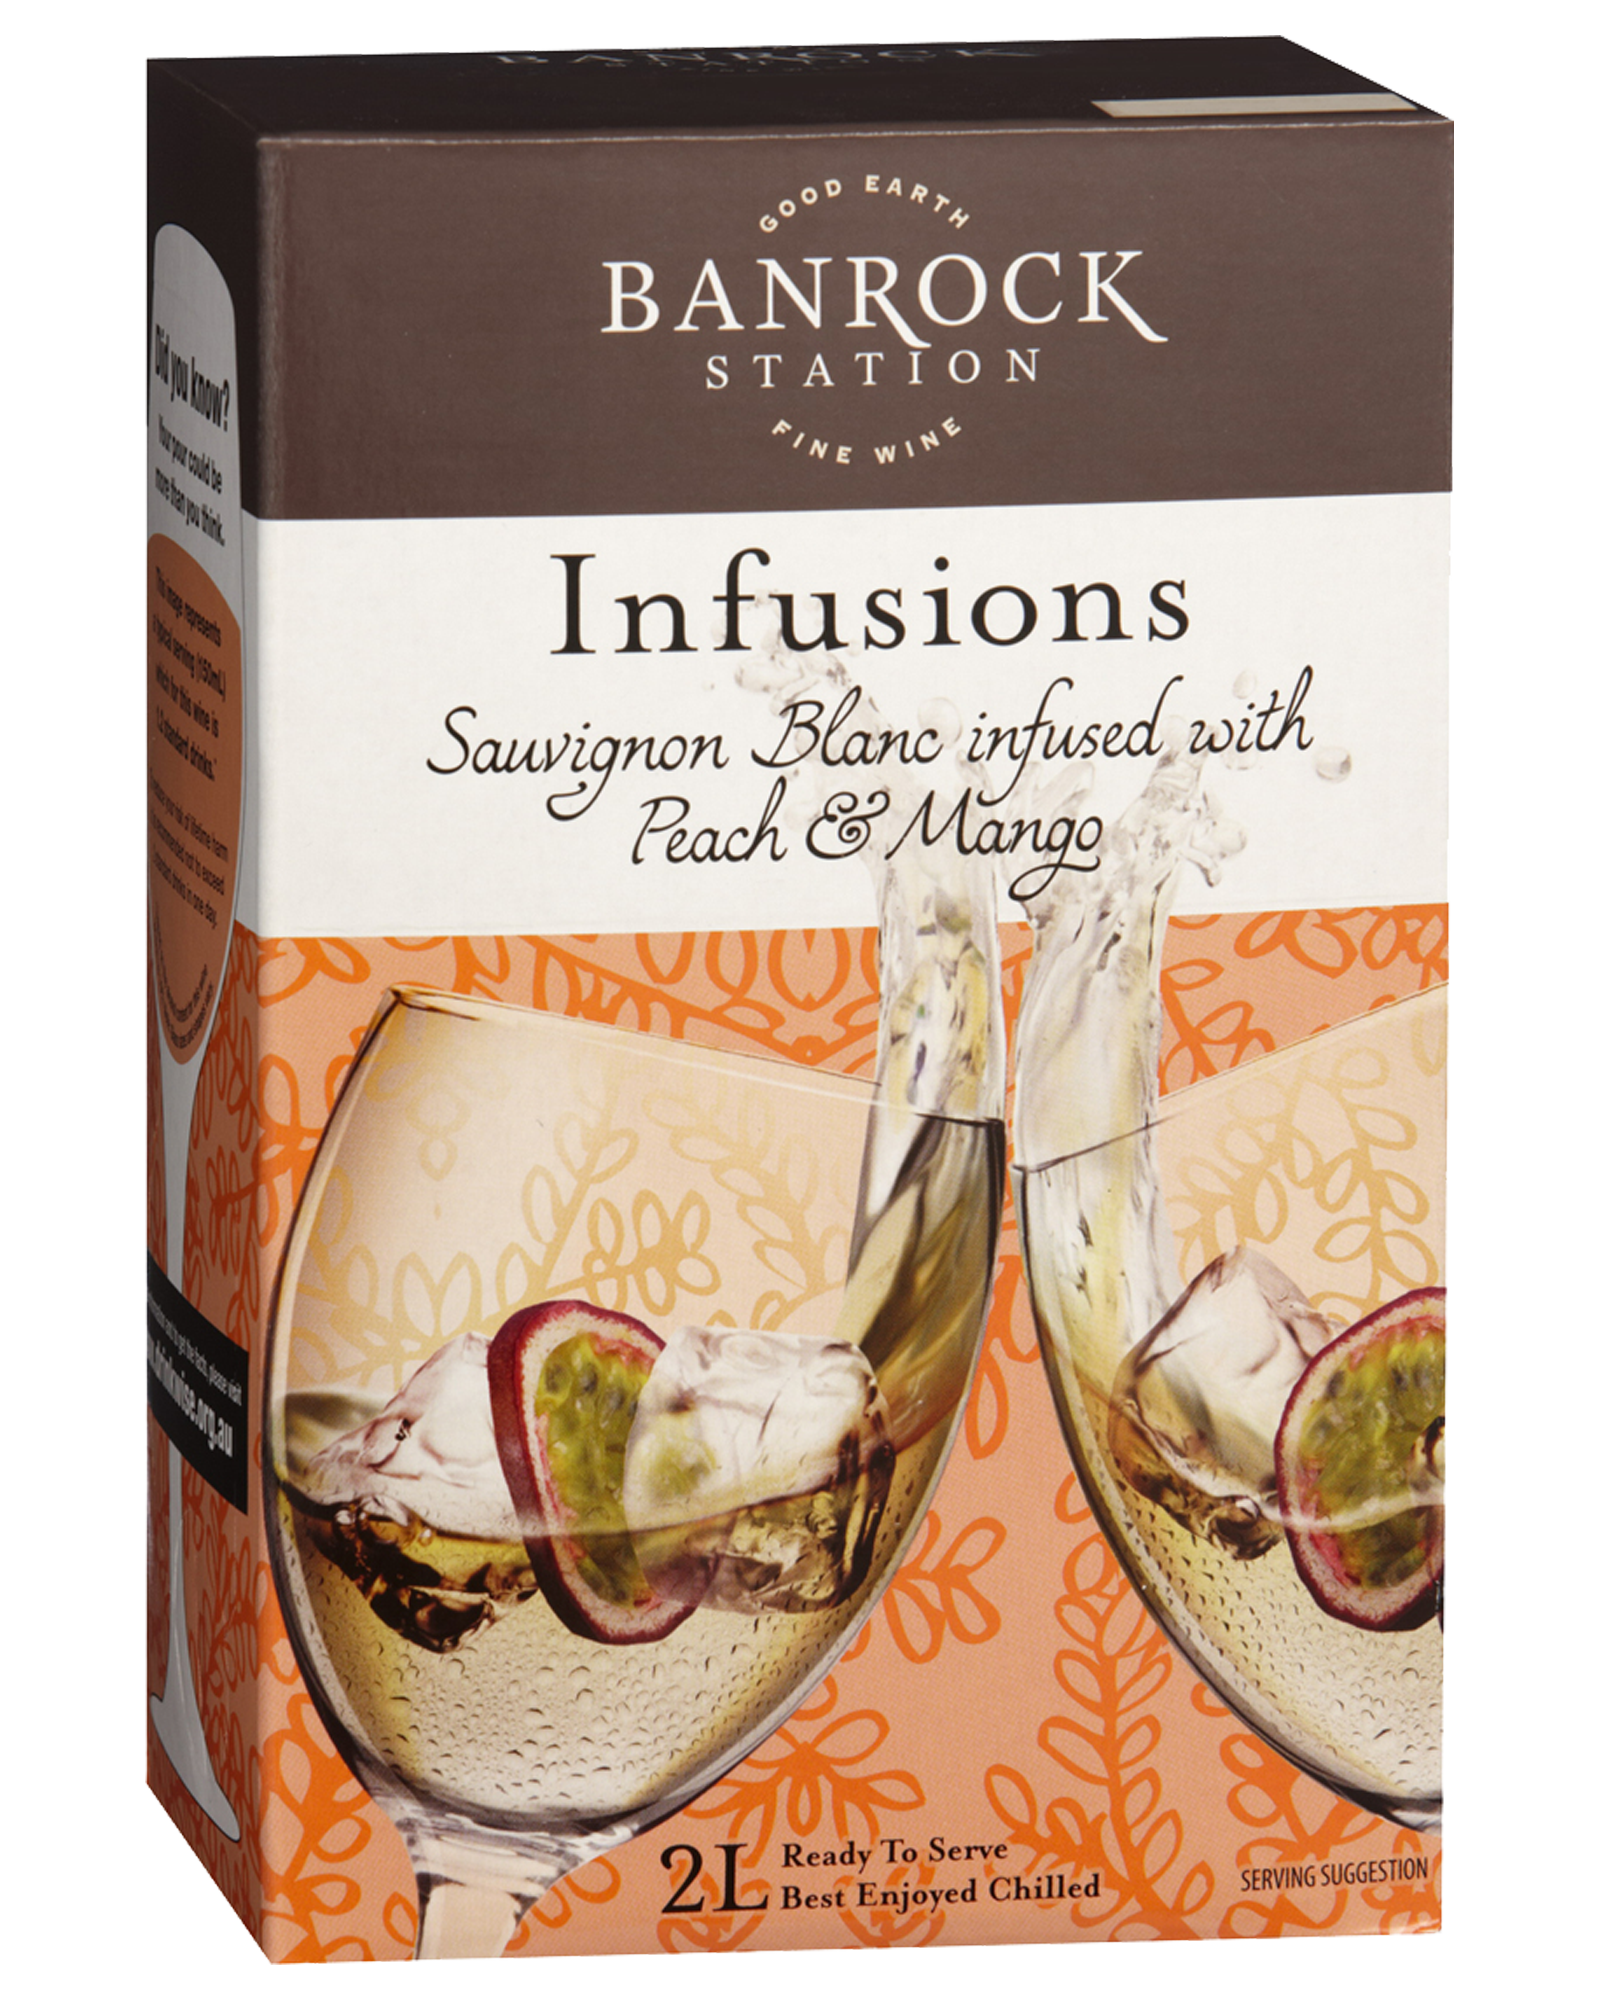 Banrock Station Infusions Sauvignon Blanc infused with Peach & Mango Cask 2L